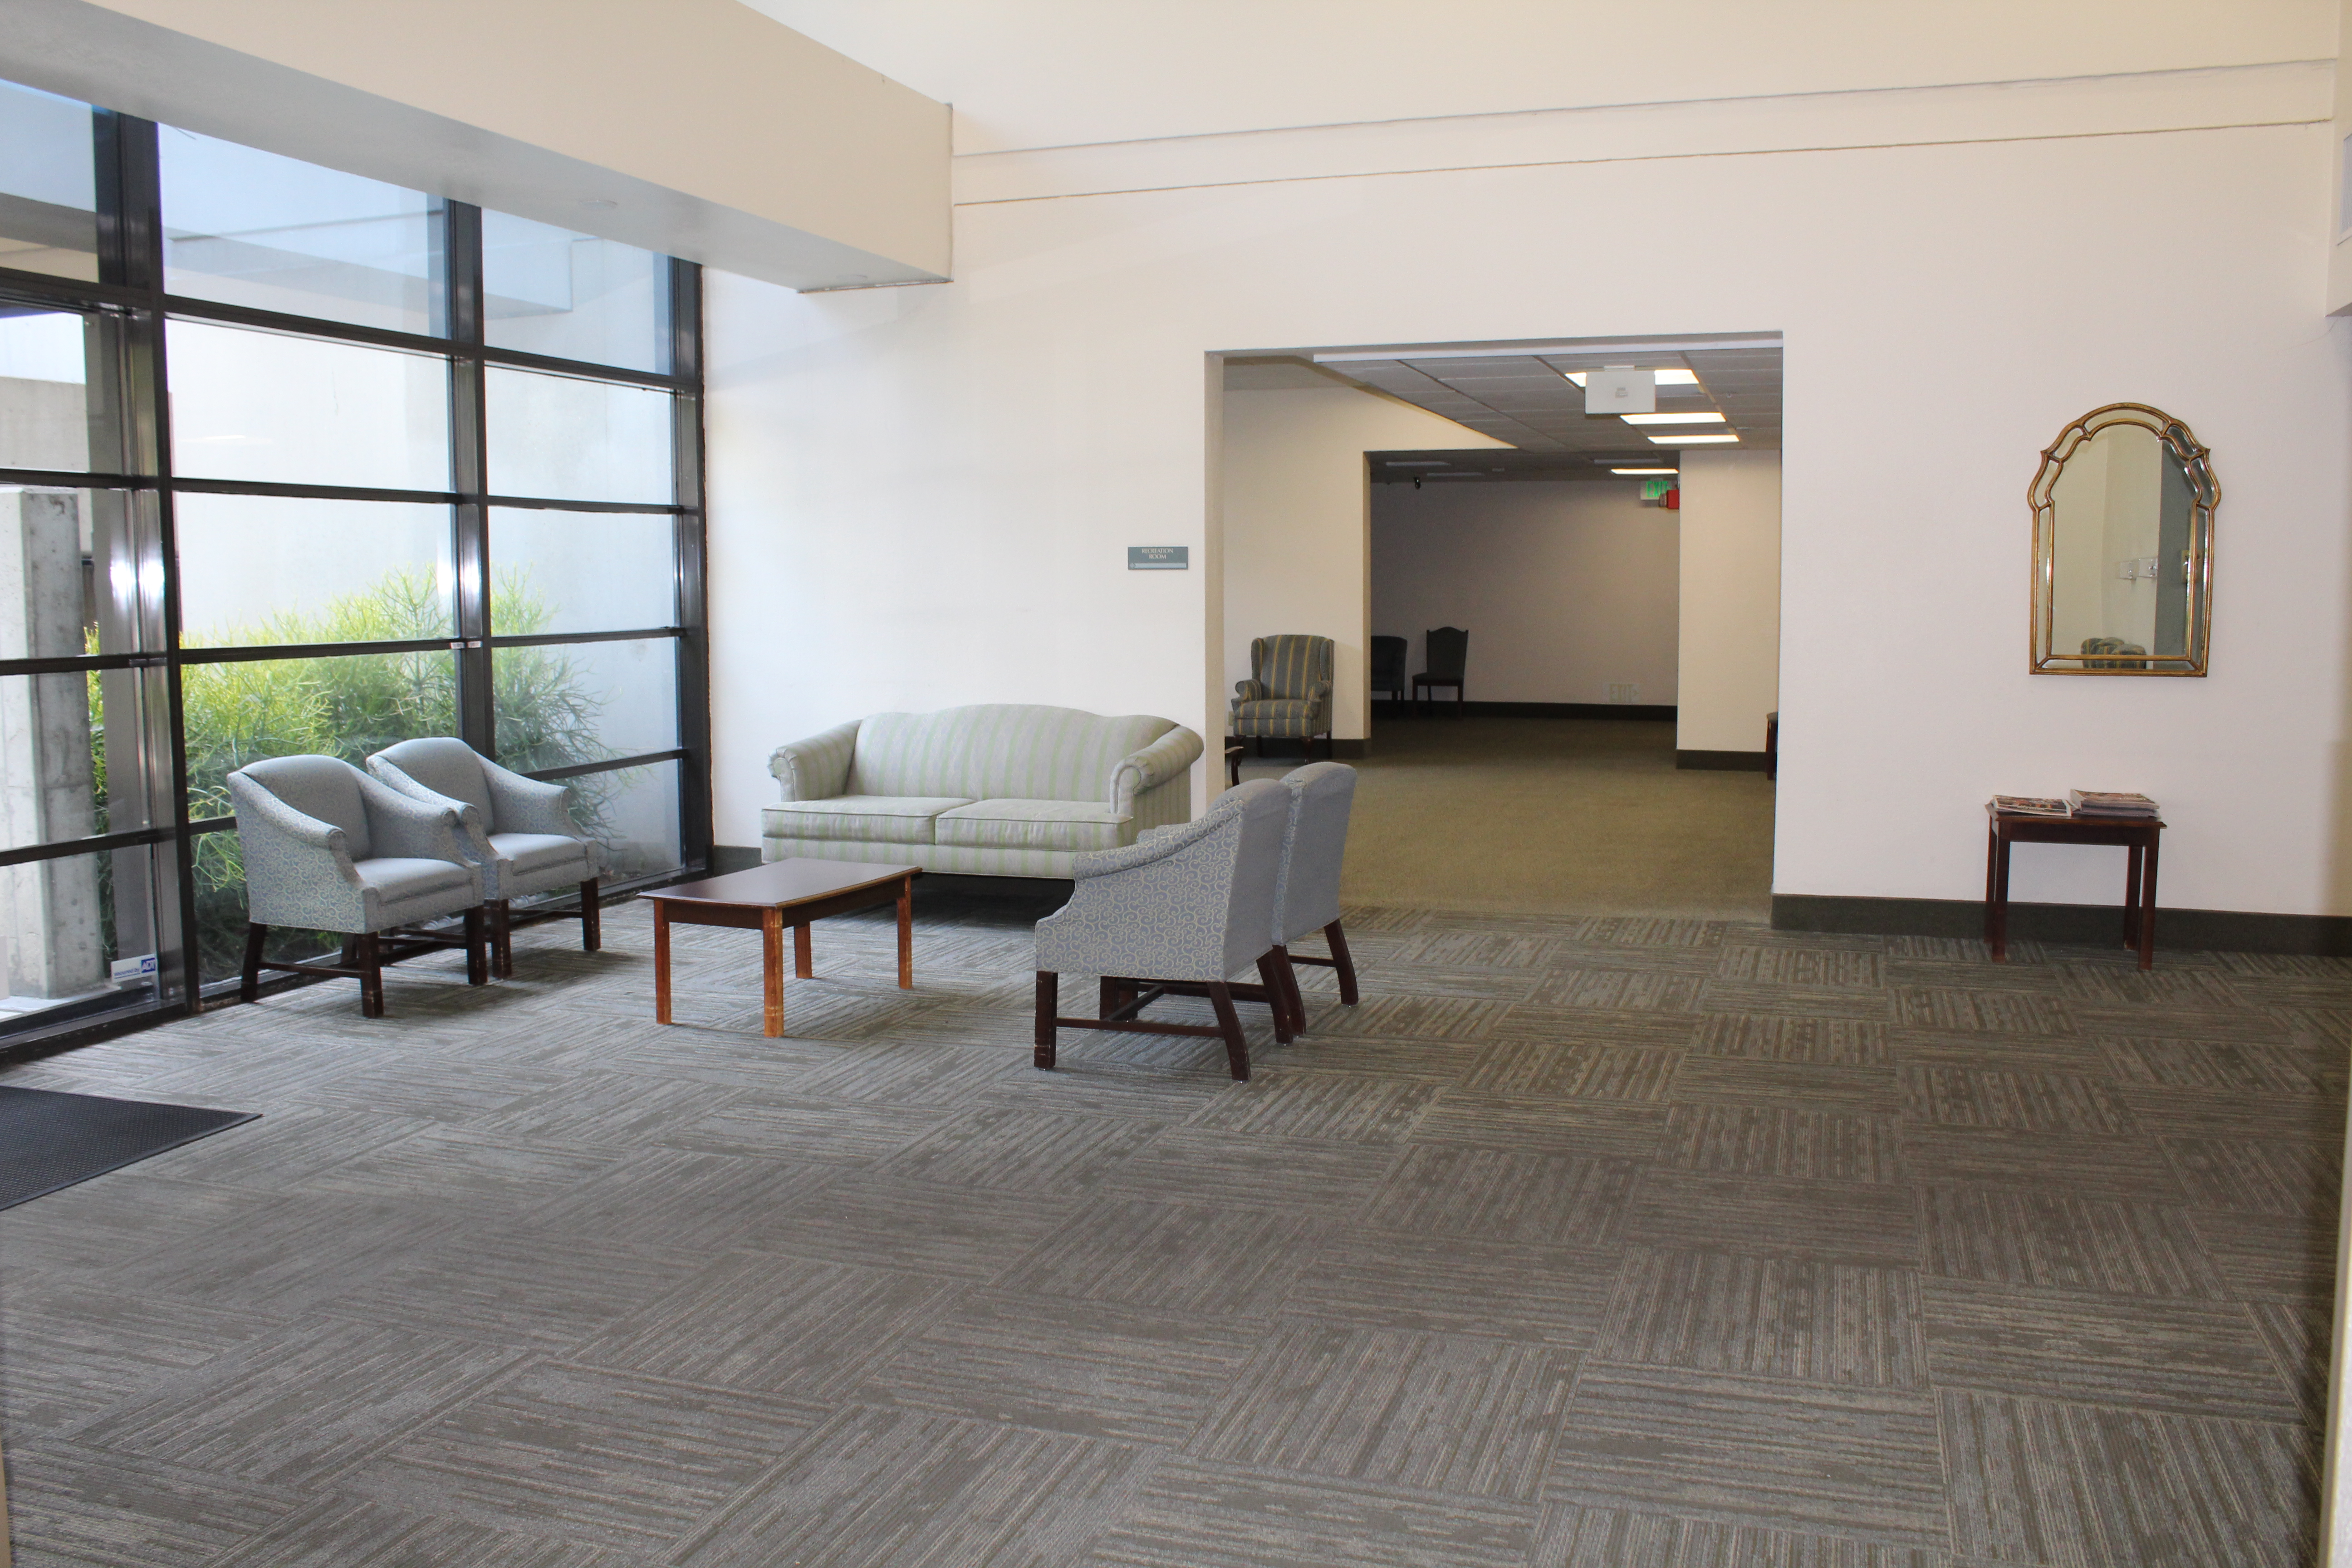 Interior view of a community room of Angelus Plaza 1. Grey sofa chairs, two across from each other with a rectangular coffee table inbetween them and a loveseat to the side next to entryway to another room.